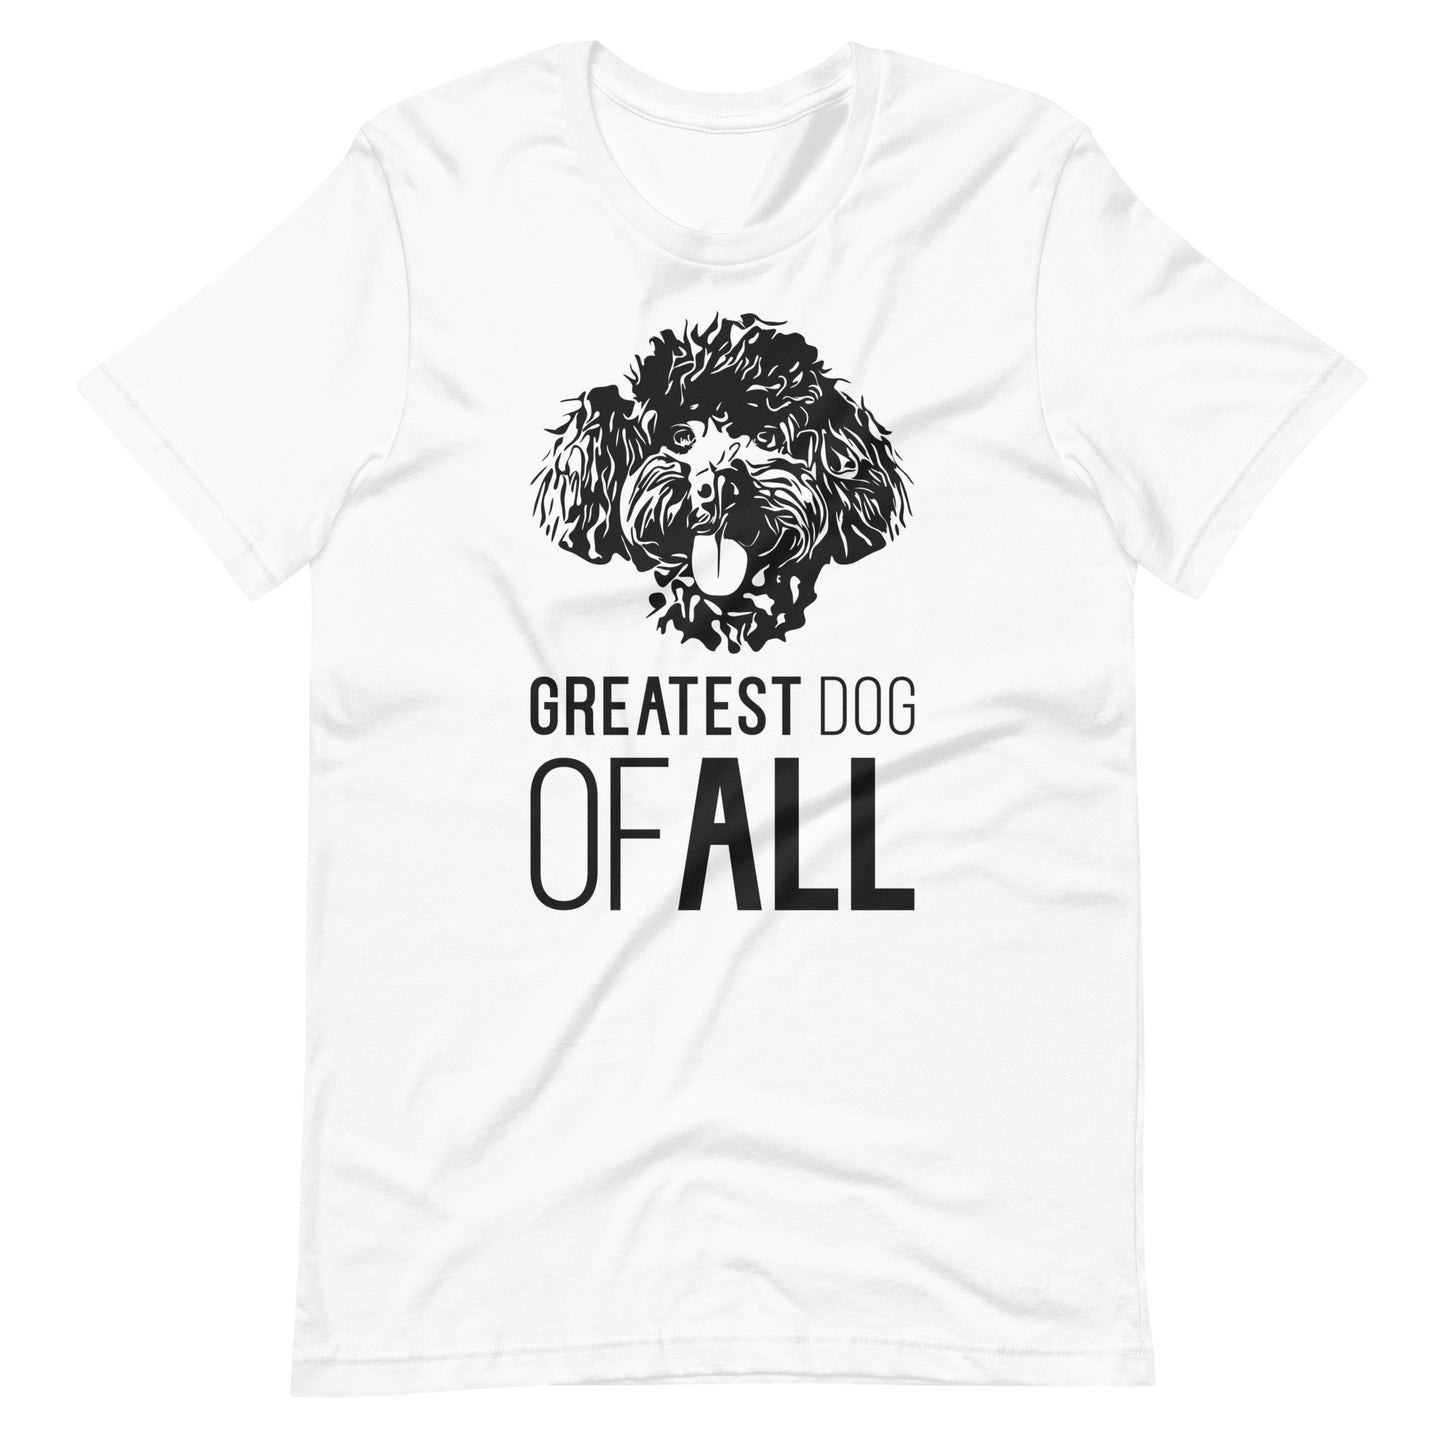 Black Toy Poodle face silhouette with Greatest Dog of All caption on unisex white t-shirt